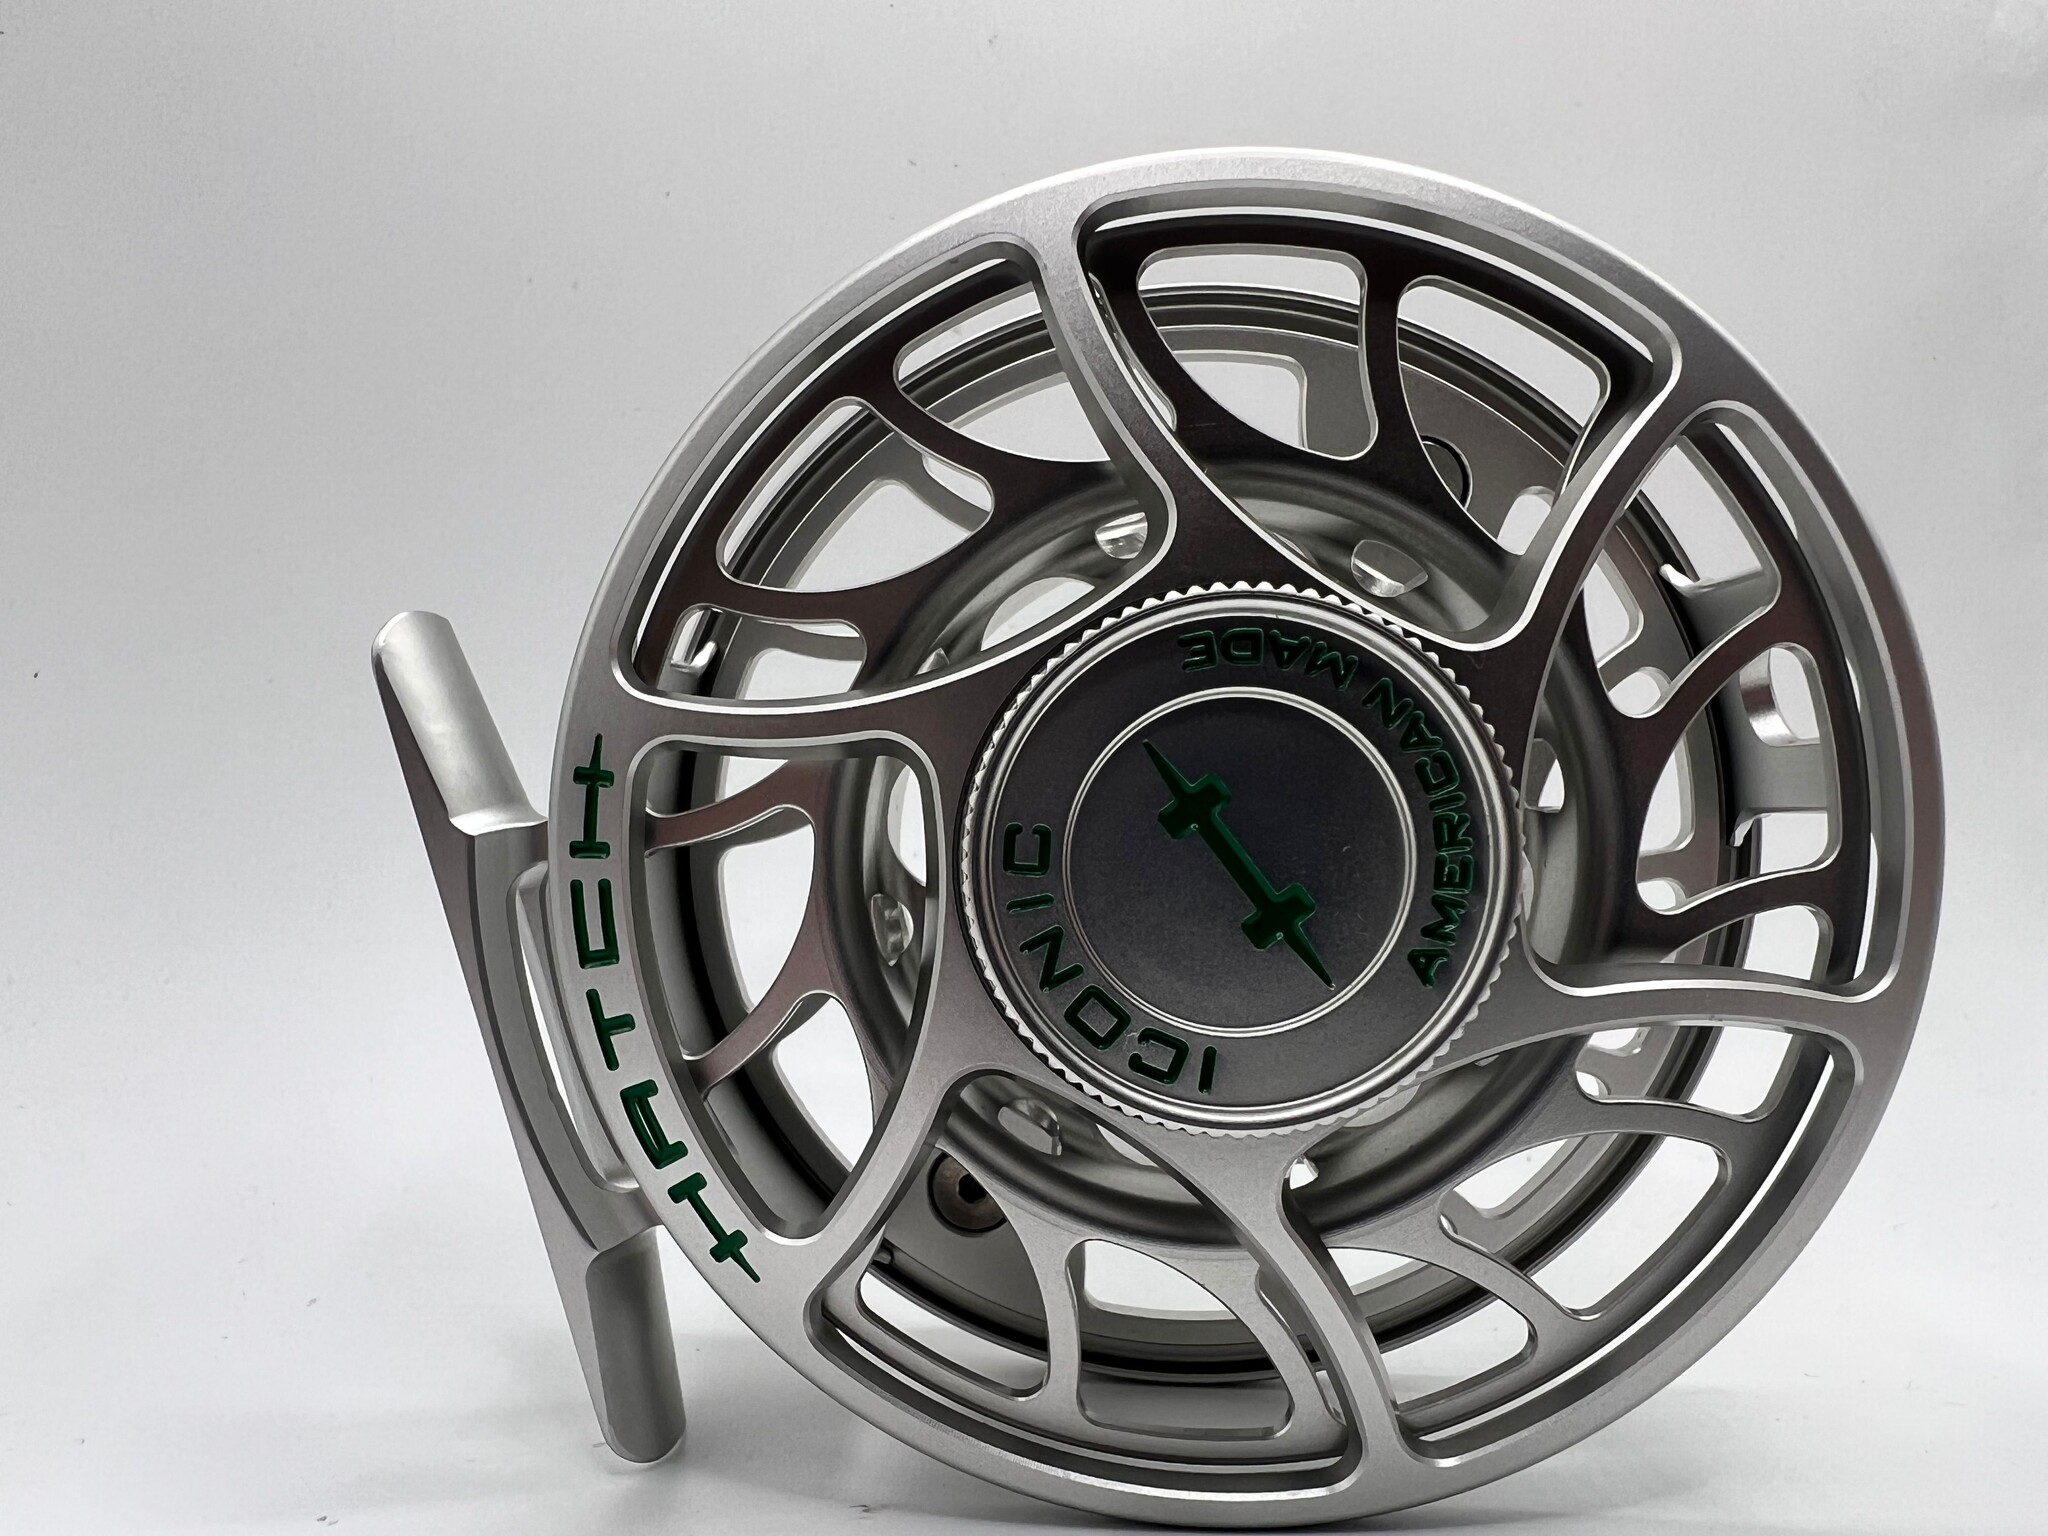 Hatch Iconic Fly Reel - Watershed Fly Shop